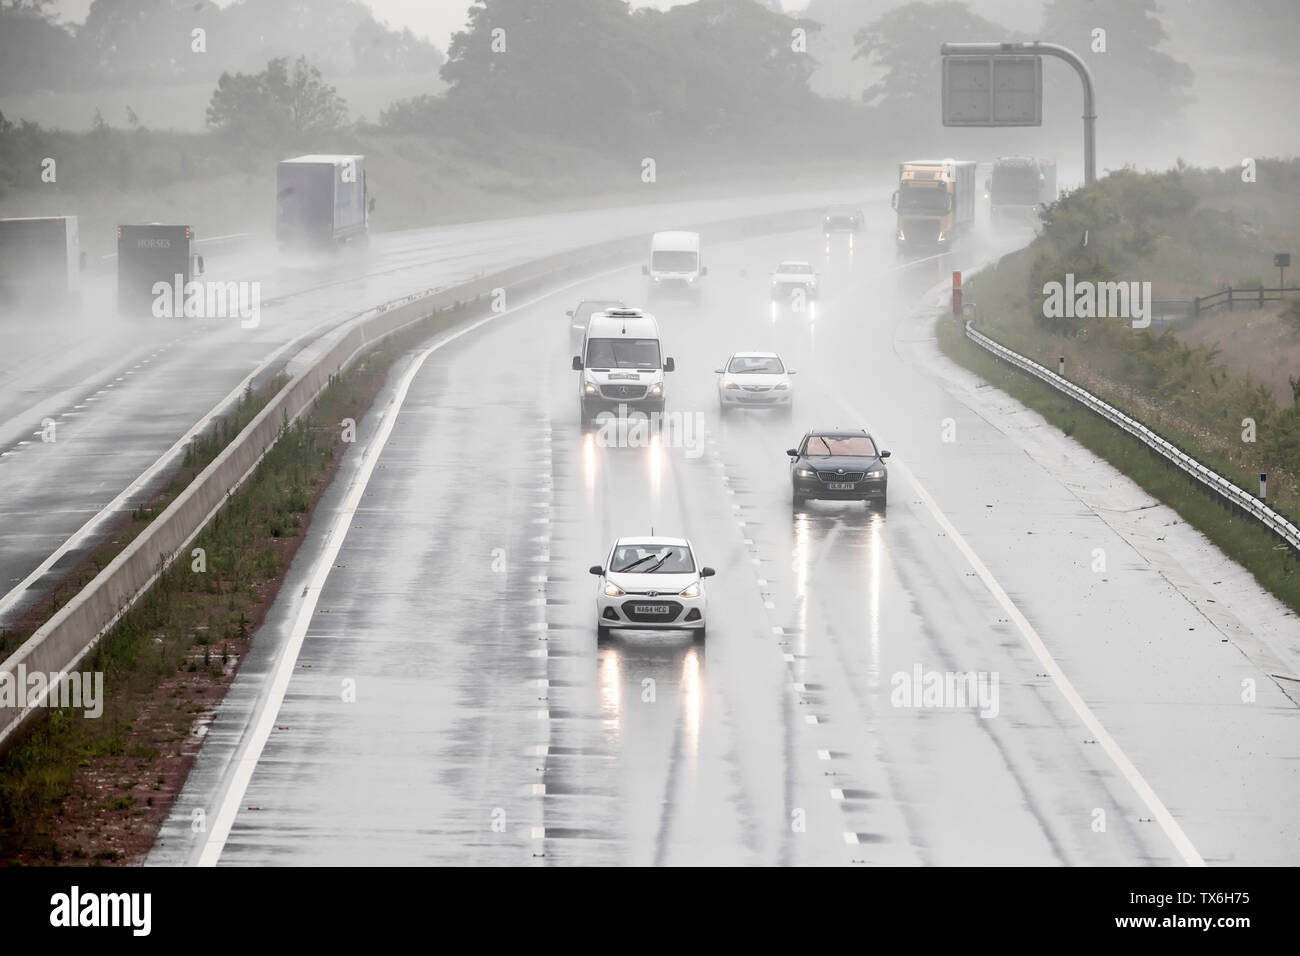 Torrential rain on the A1 near Leeming in Yorkshire on what is expected to be the hottest day of the year, as thunderstorms could bring a month's worth of rain to parts of the UK, before the hottest temperatures of the year so far bring a balmy end to June. Stock Photo